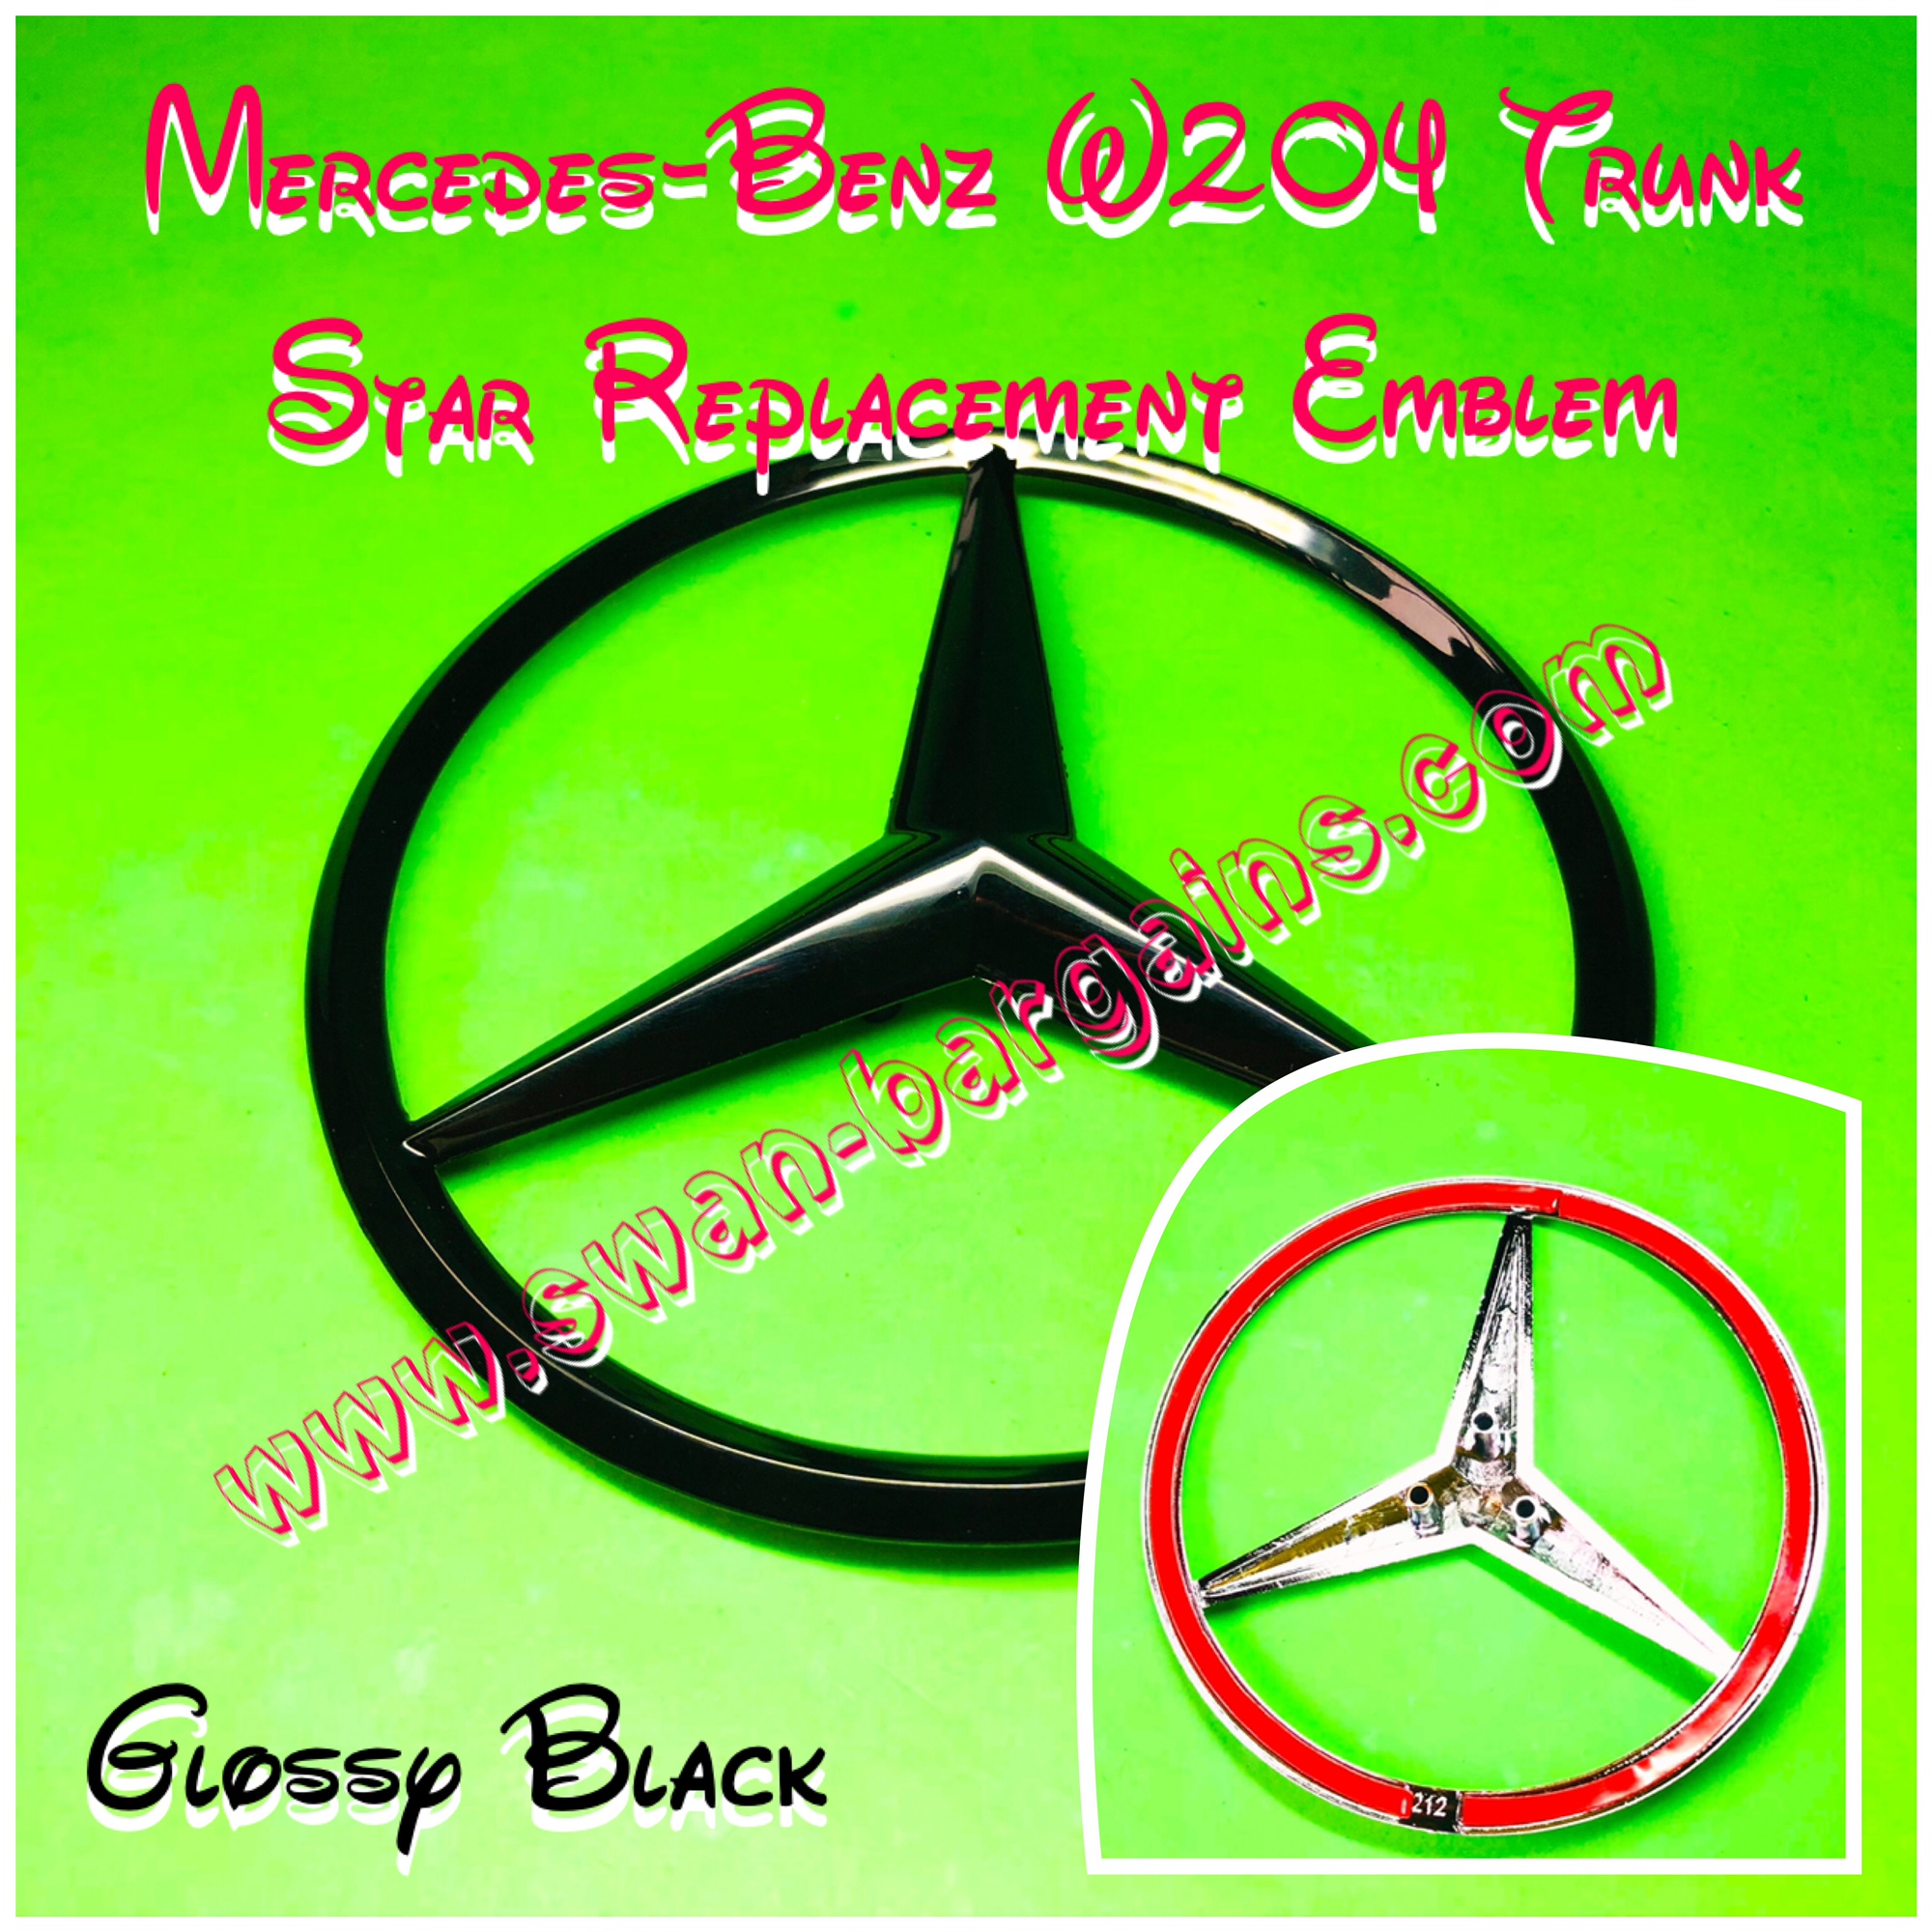 Benz C Class Trunk Star Replacement Emblem – Welcome to Swan Bargains  Online Store!